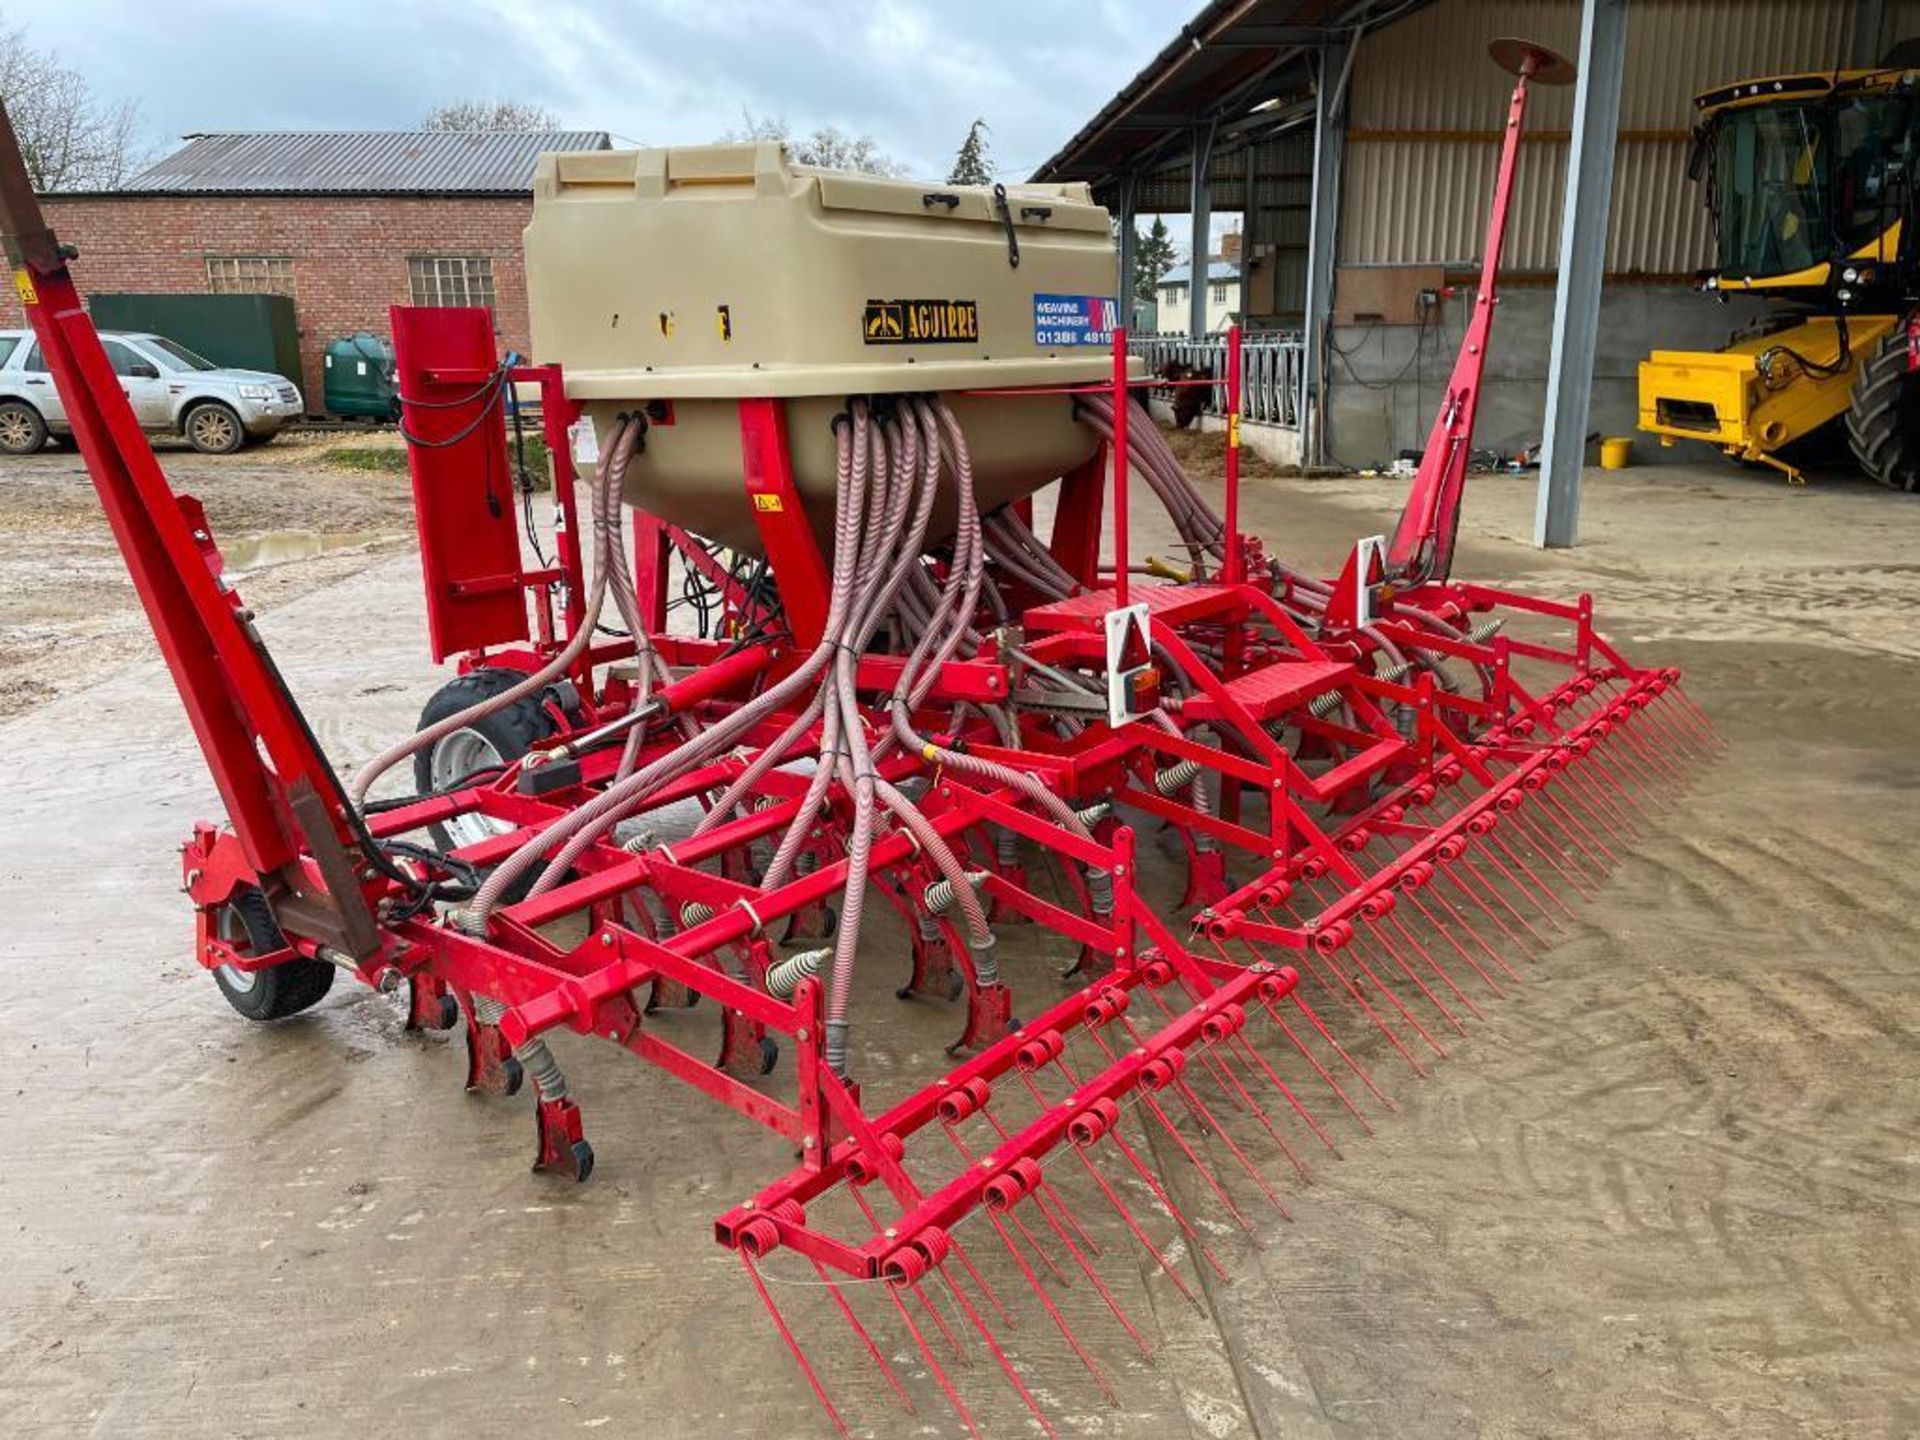 2010 Weaving Aguirre 4.8m tine drill with following harrow. Serial No: 1224. ​​​​​​​N.B. Instruction - Image 9 of 19